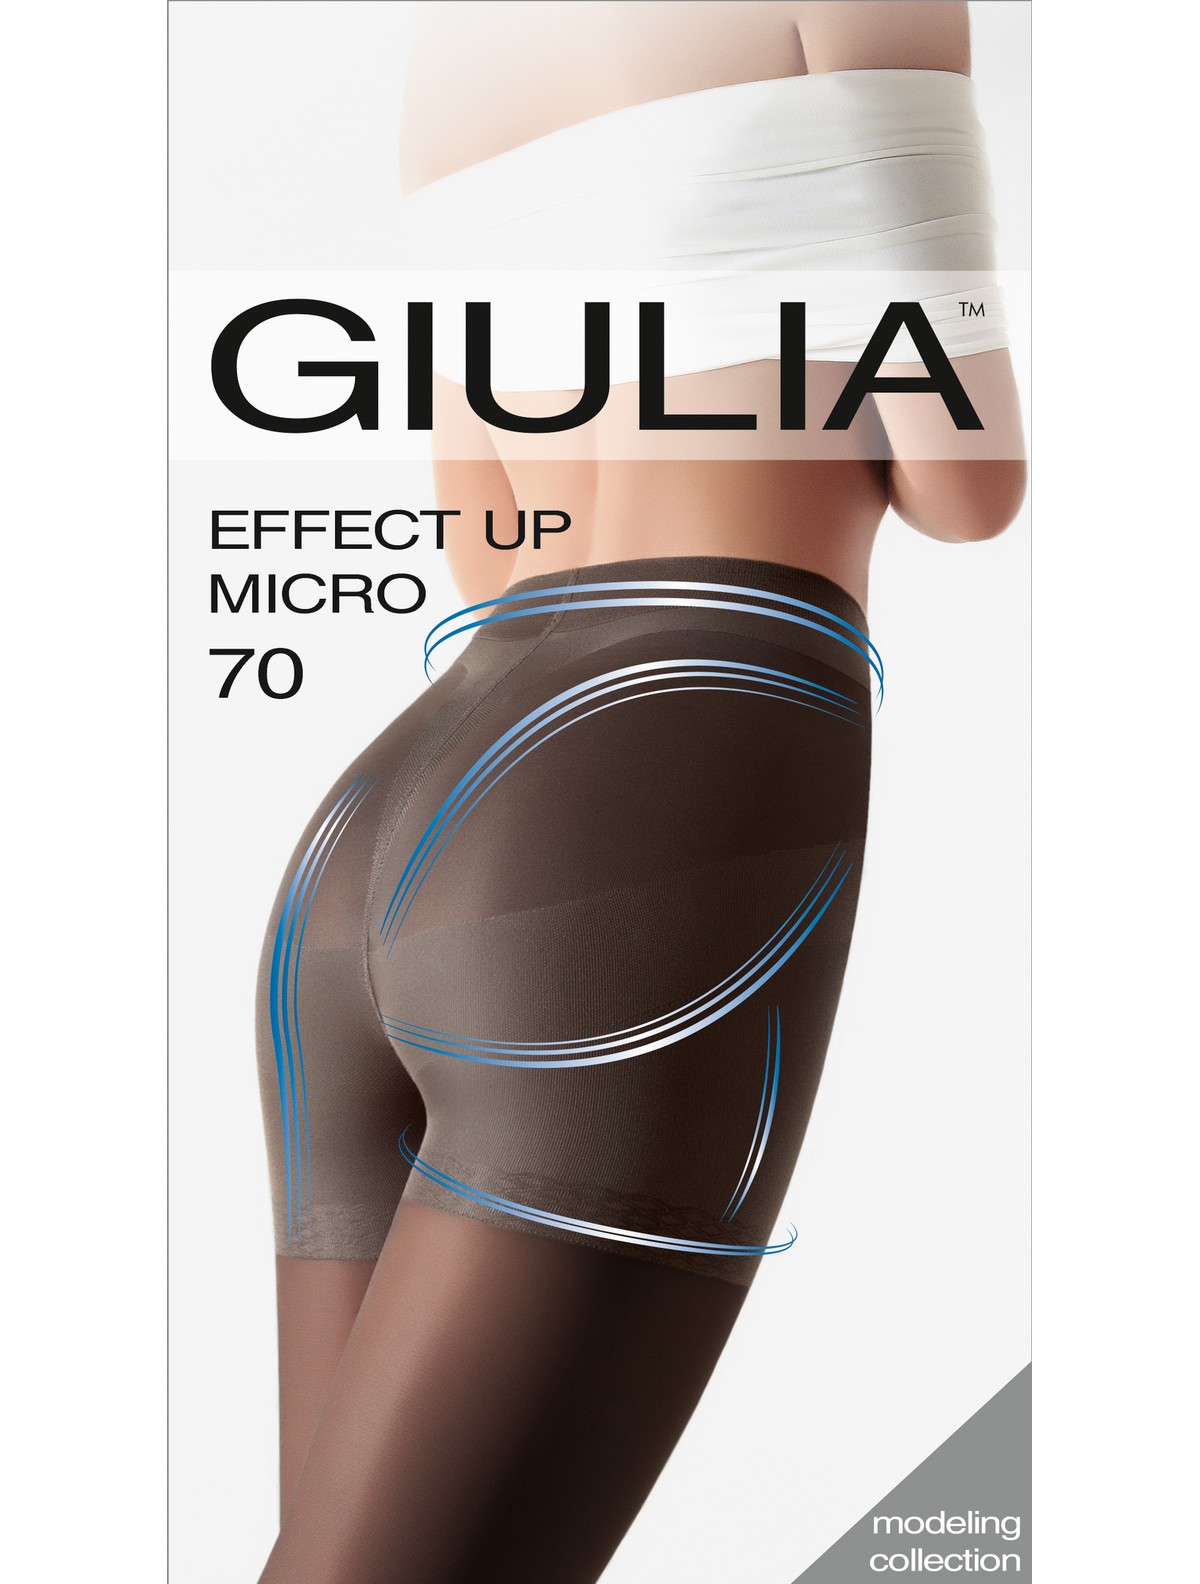 tights 70 UP shaping GIULIA EFFECT